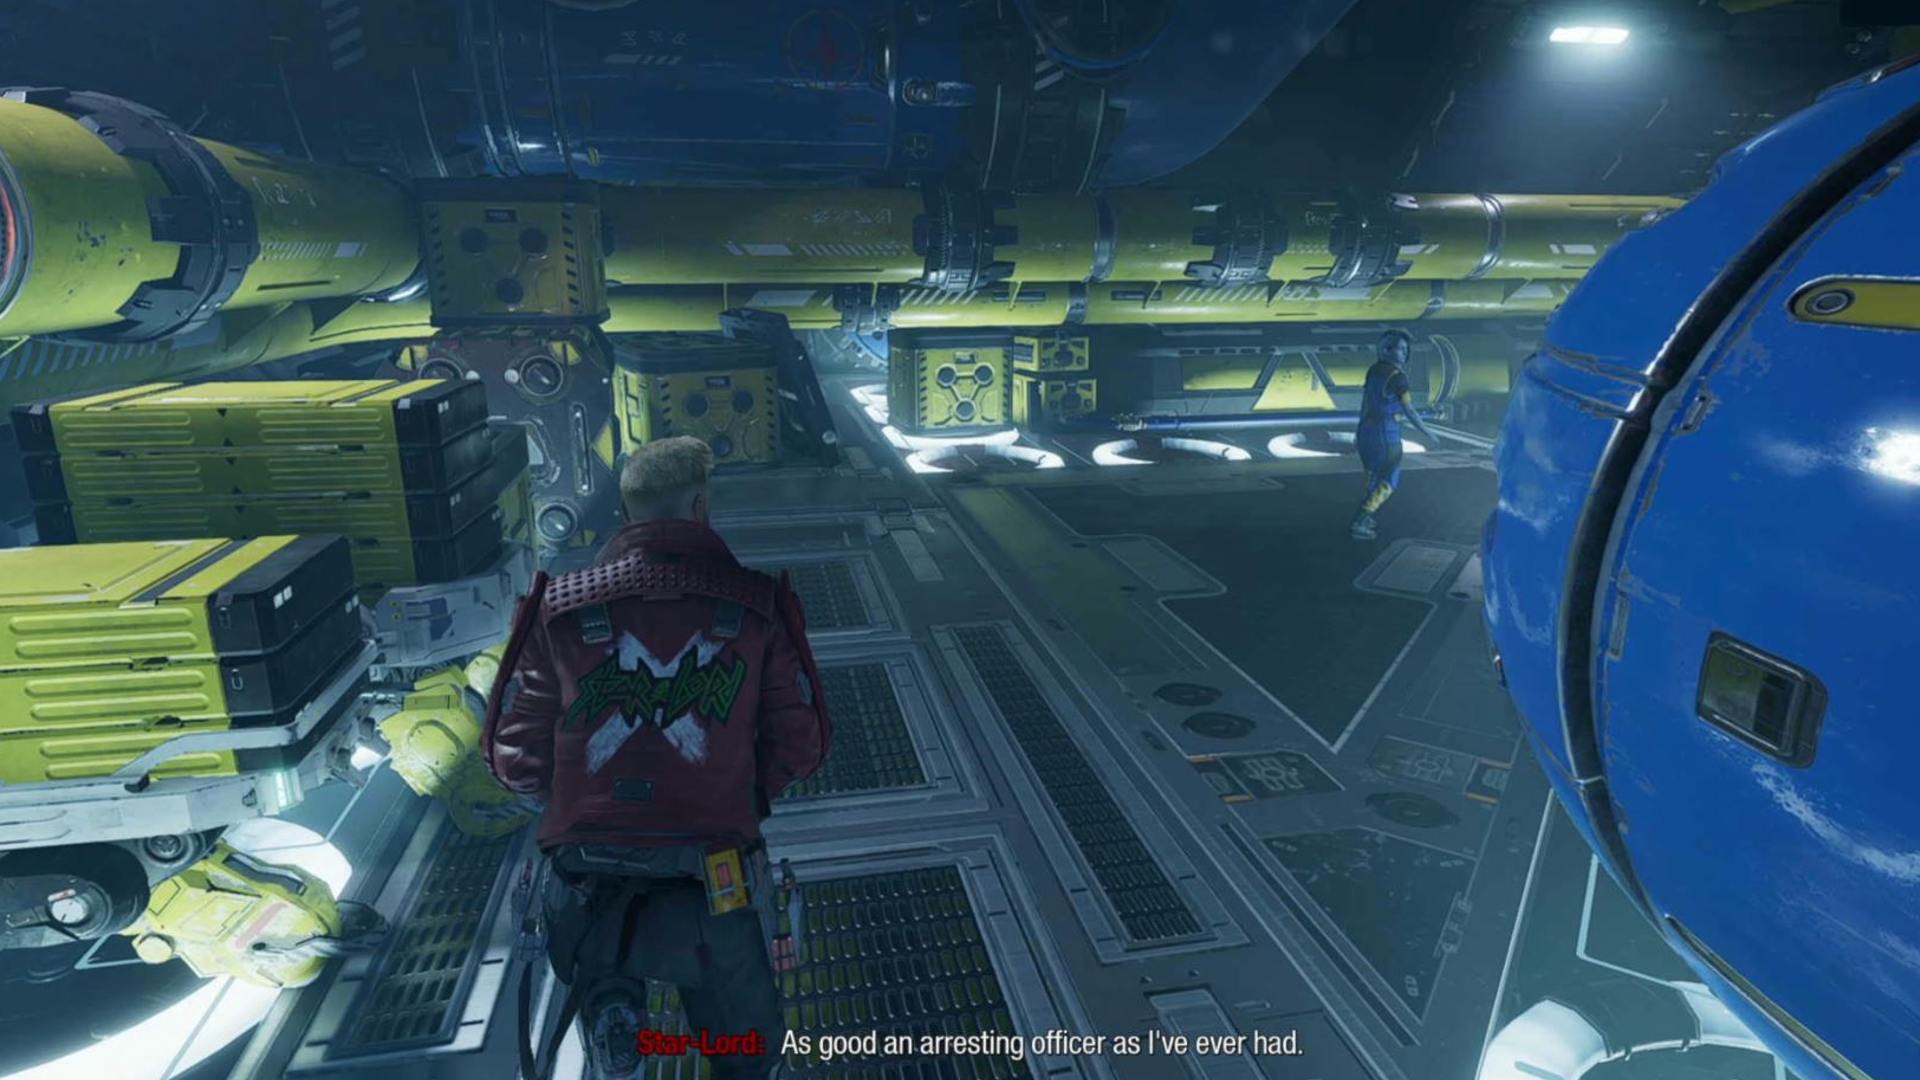 Guardians of the Galaxy outfit locations: Star-Lord is walking in handcuffs to an opening in the pipes.